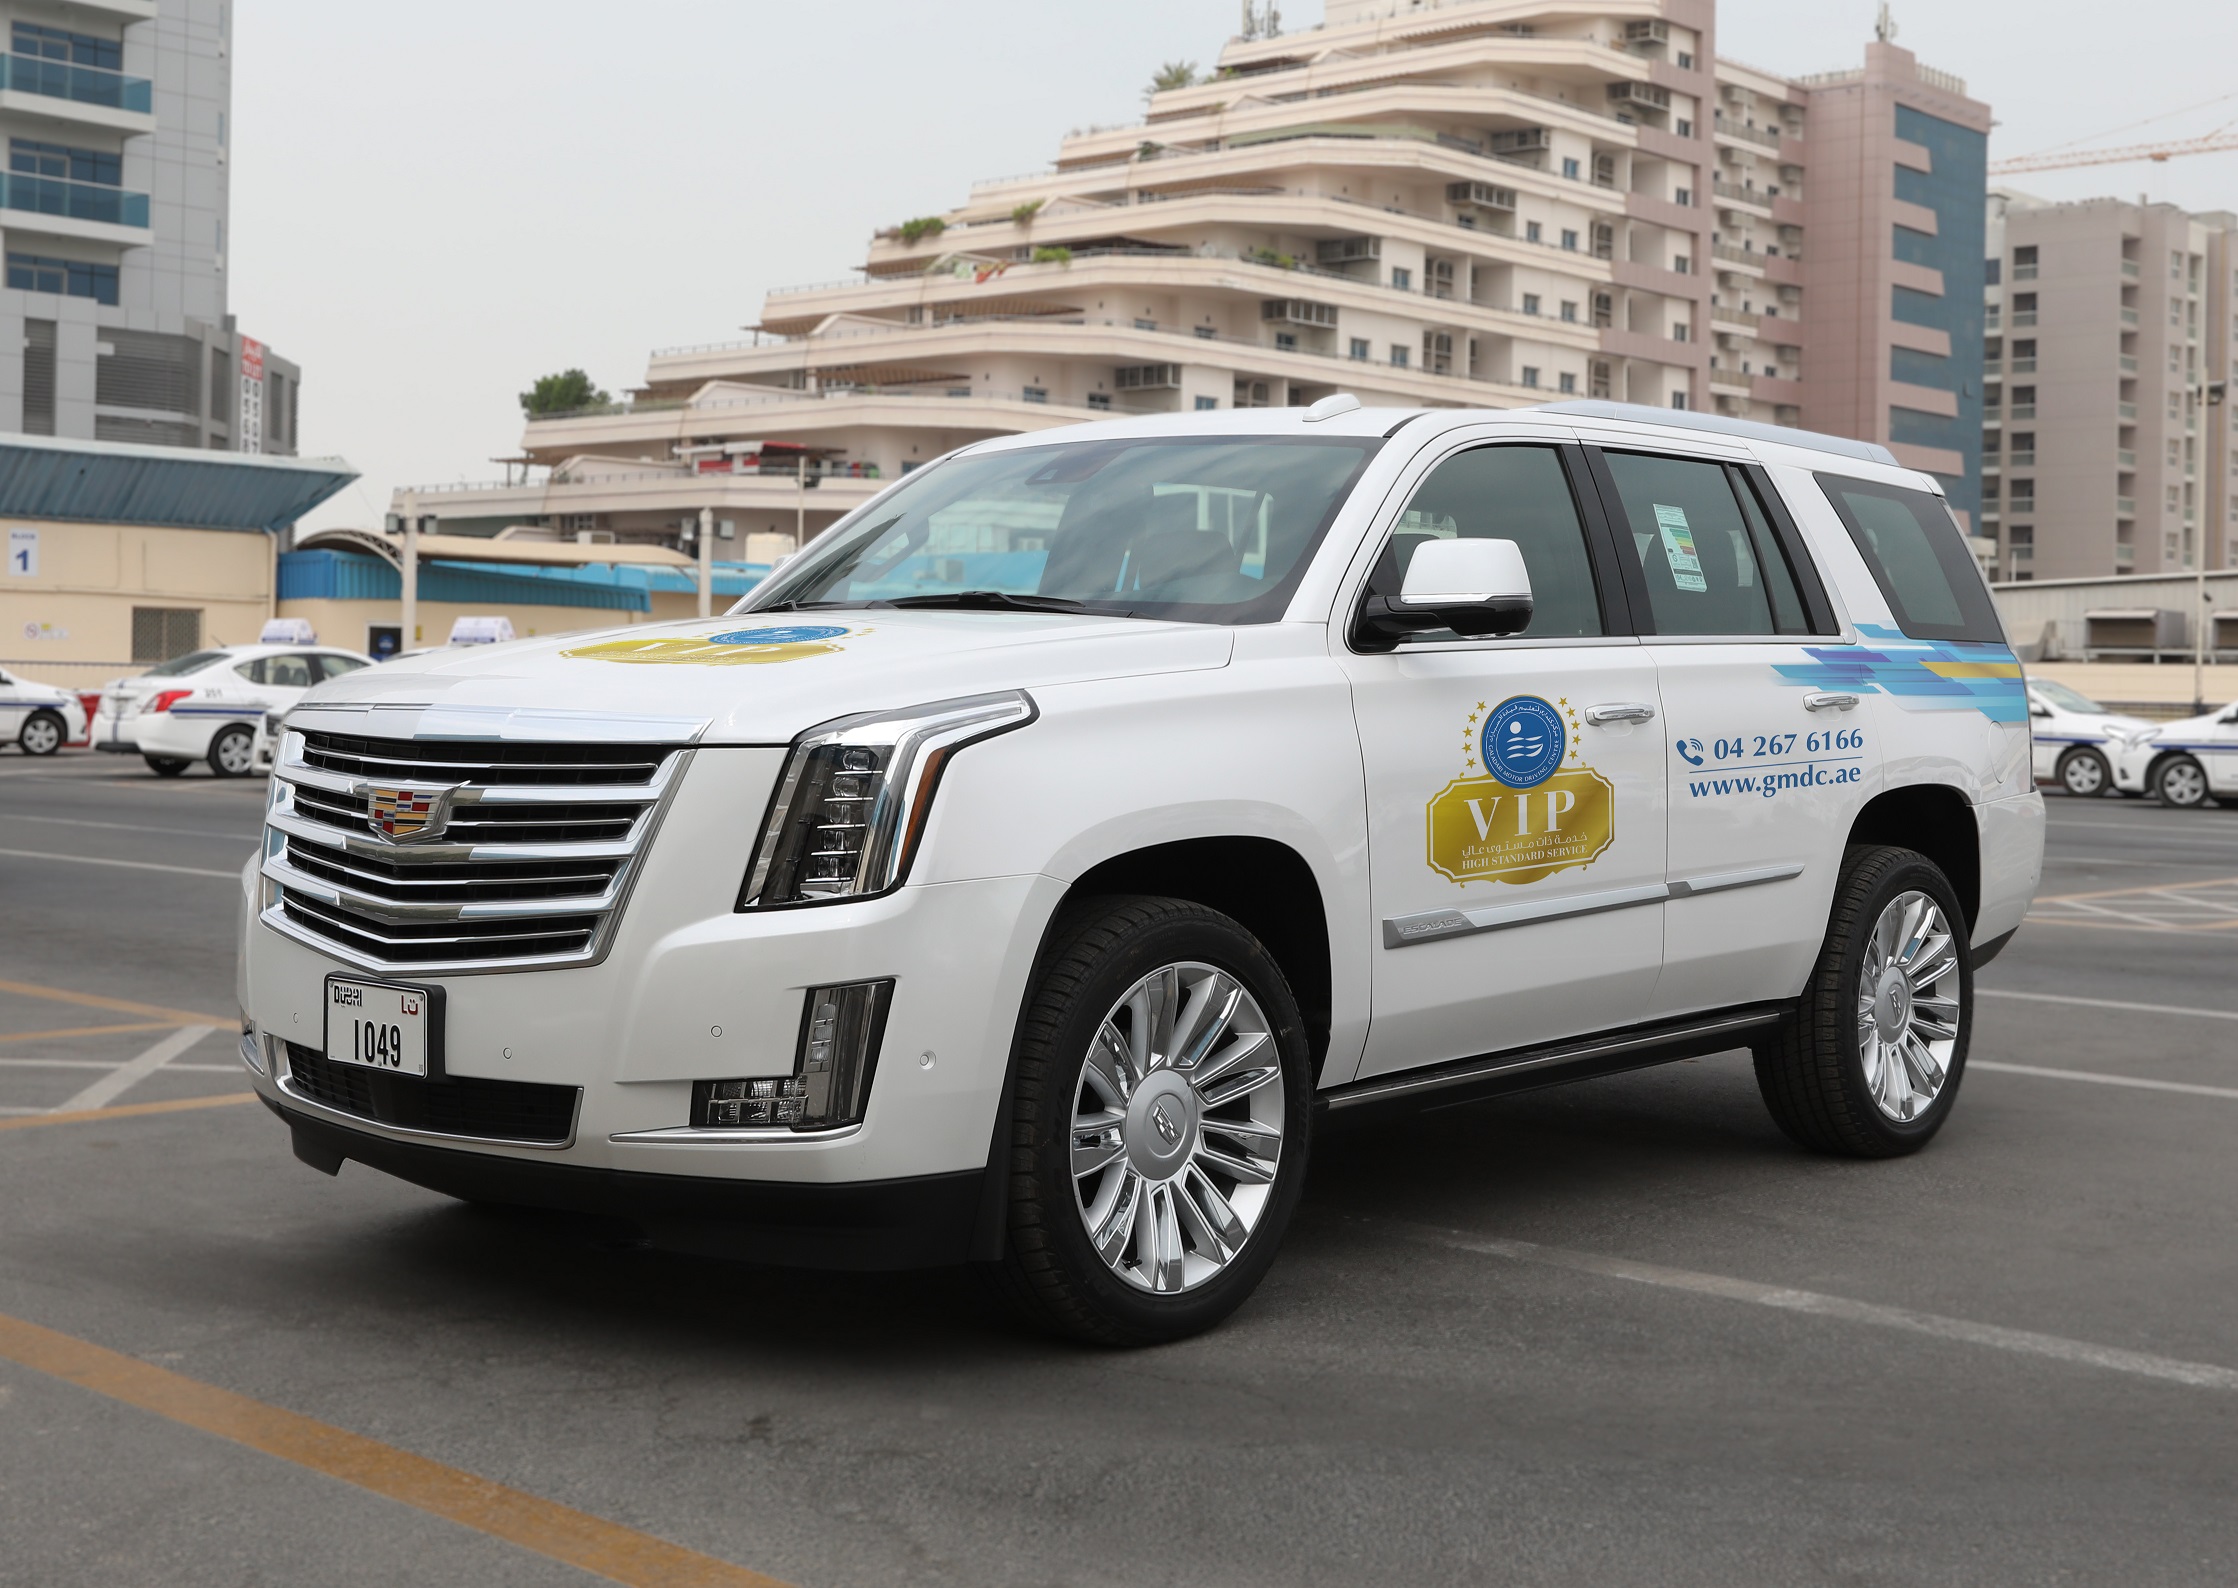 Al Ghandi Auto and Galadari Motor Driving Centre partnership takes driving lessons to an ‘Escalade’ level